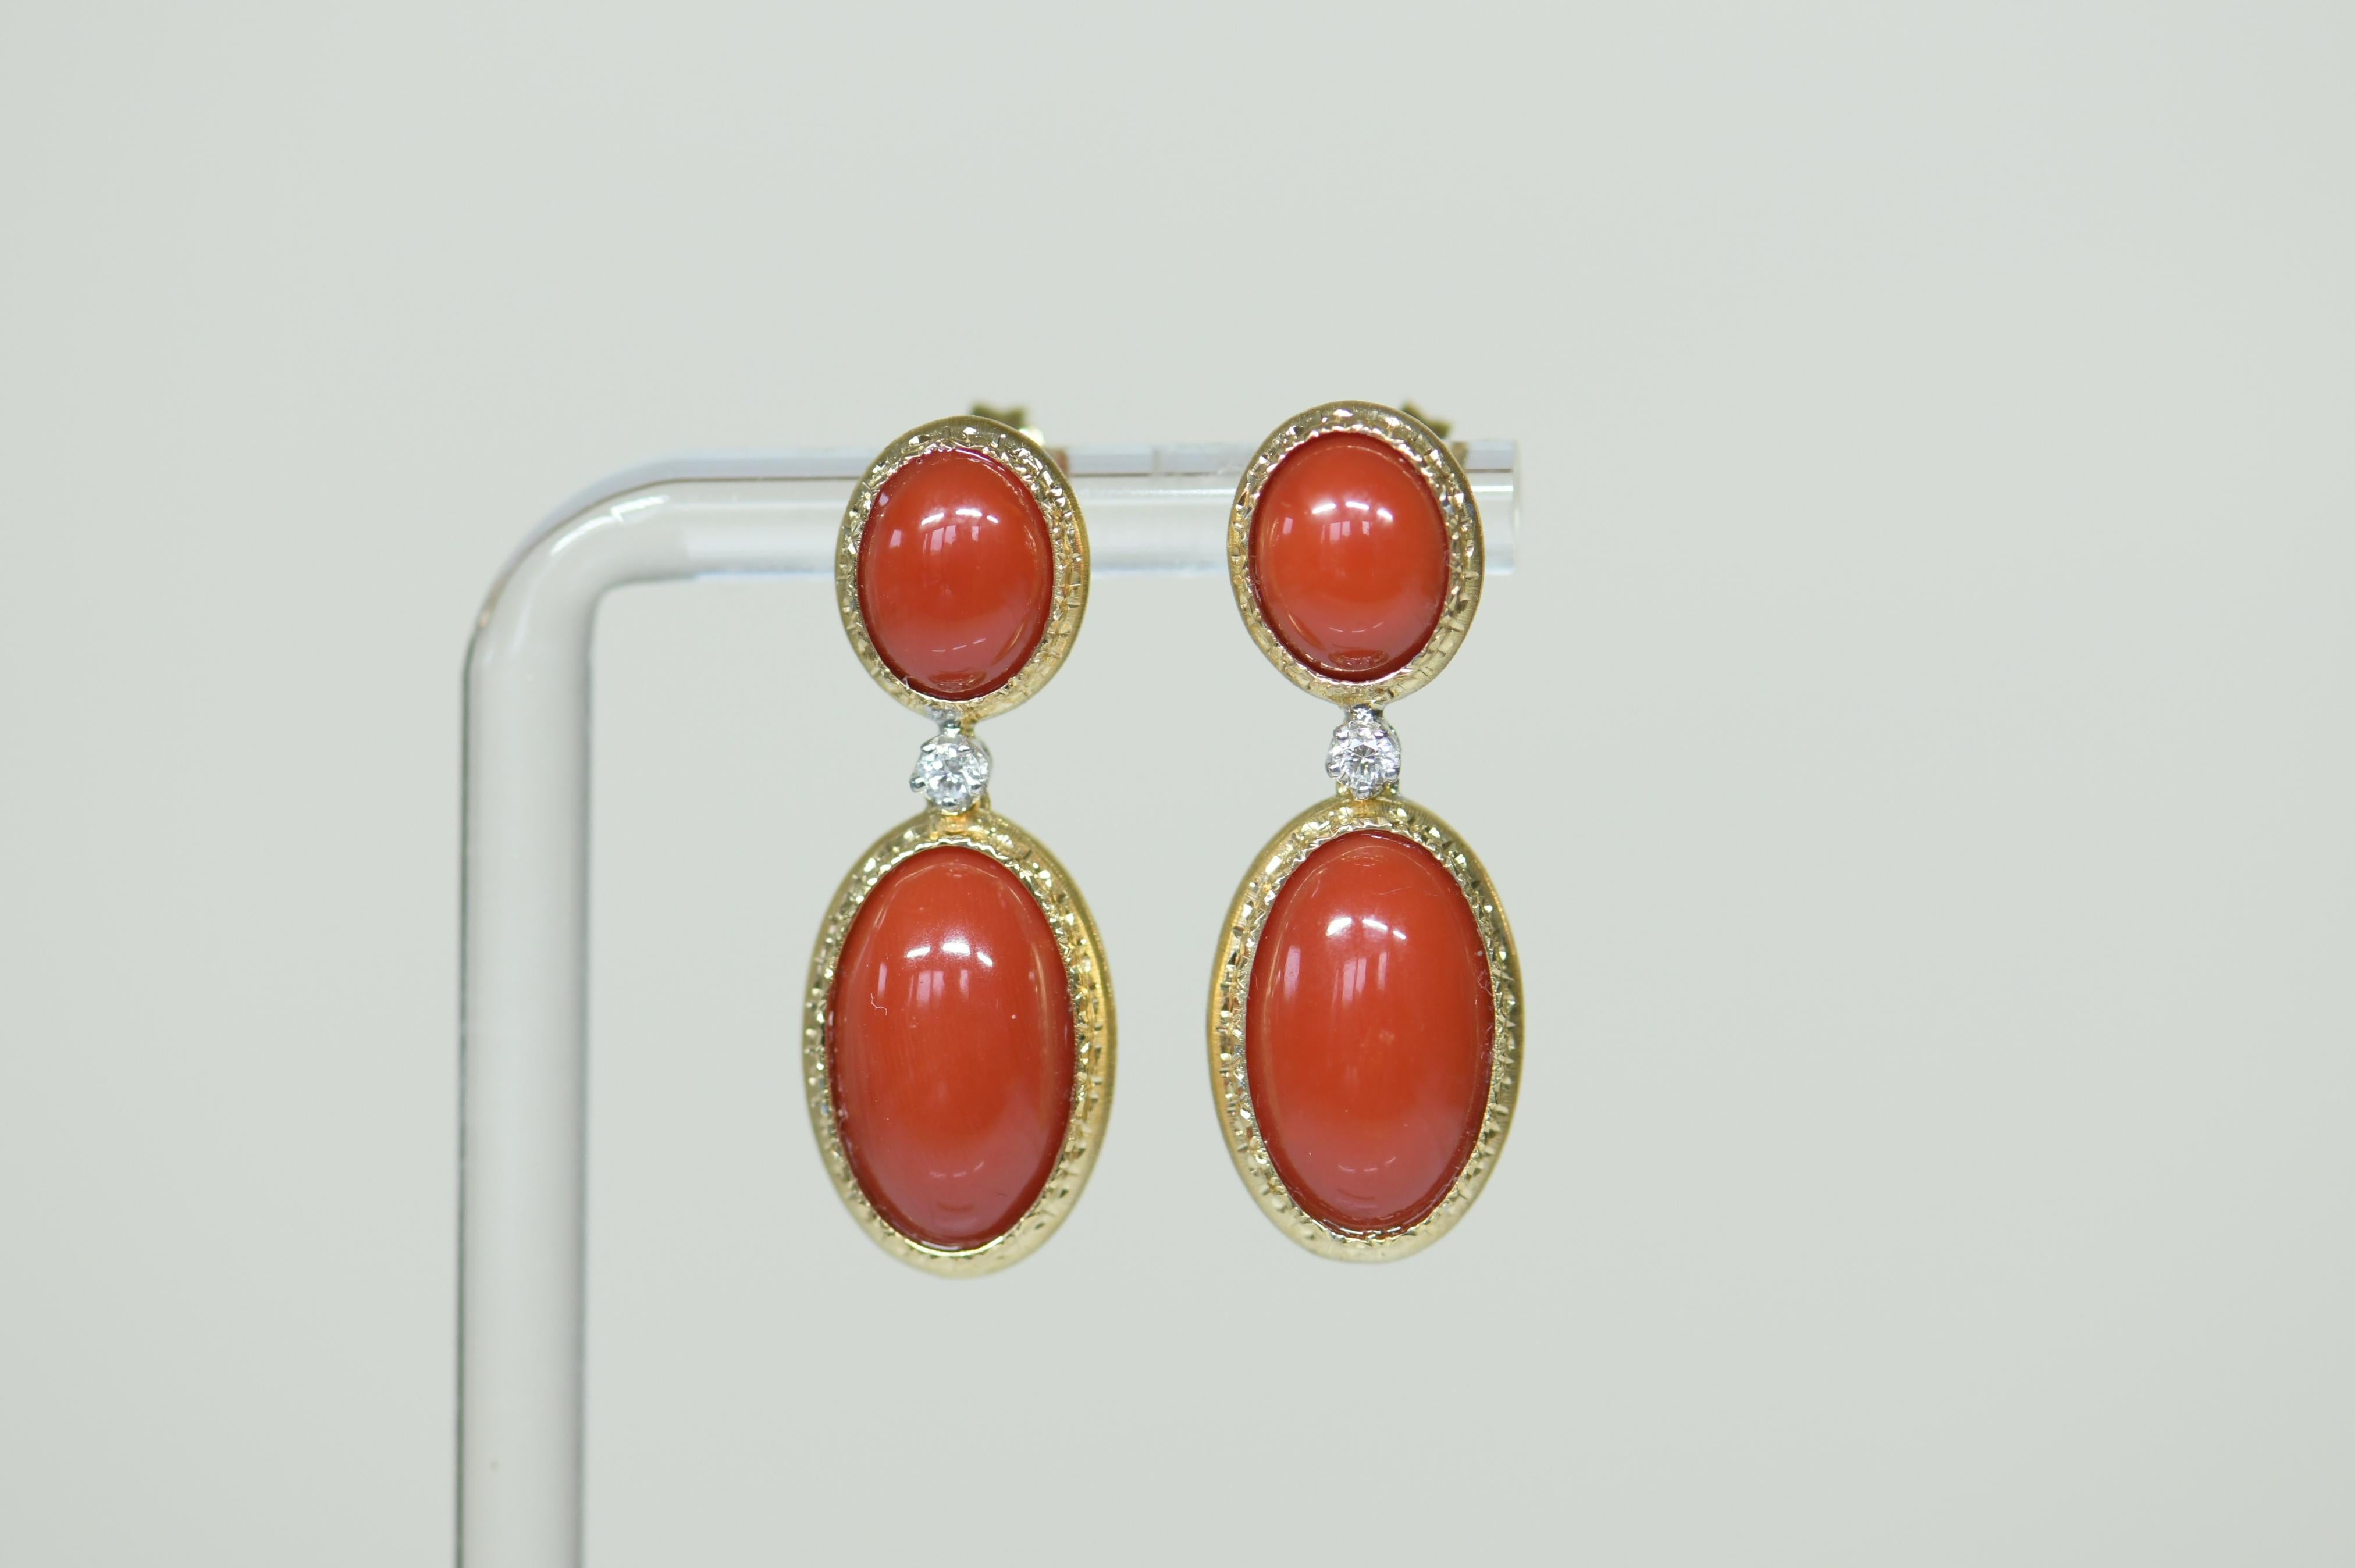 Exquisite pair of 18k yellow gold, diamond and natural un-treated oxblood red coral earrings. These are for pierced ears 3cm long x 1cm wide. The earrings consist of approx. 0.3ct of sparkly diamonds. Coral has beautiful deep red coral, there are